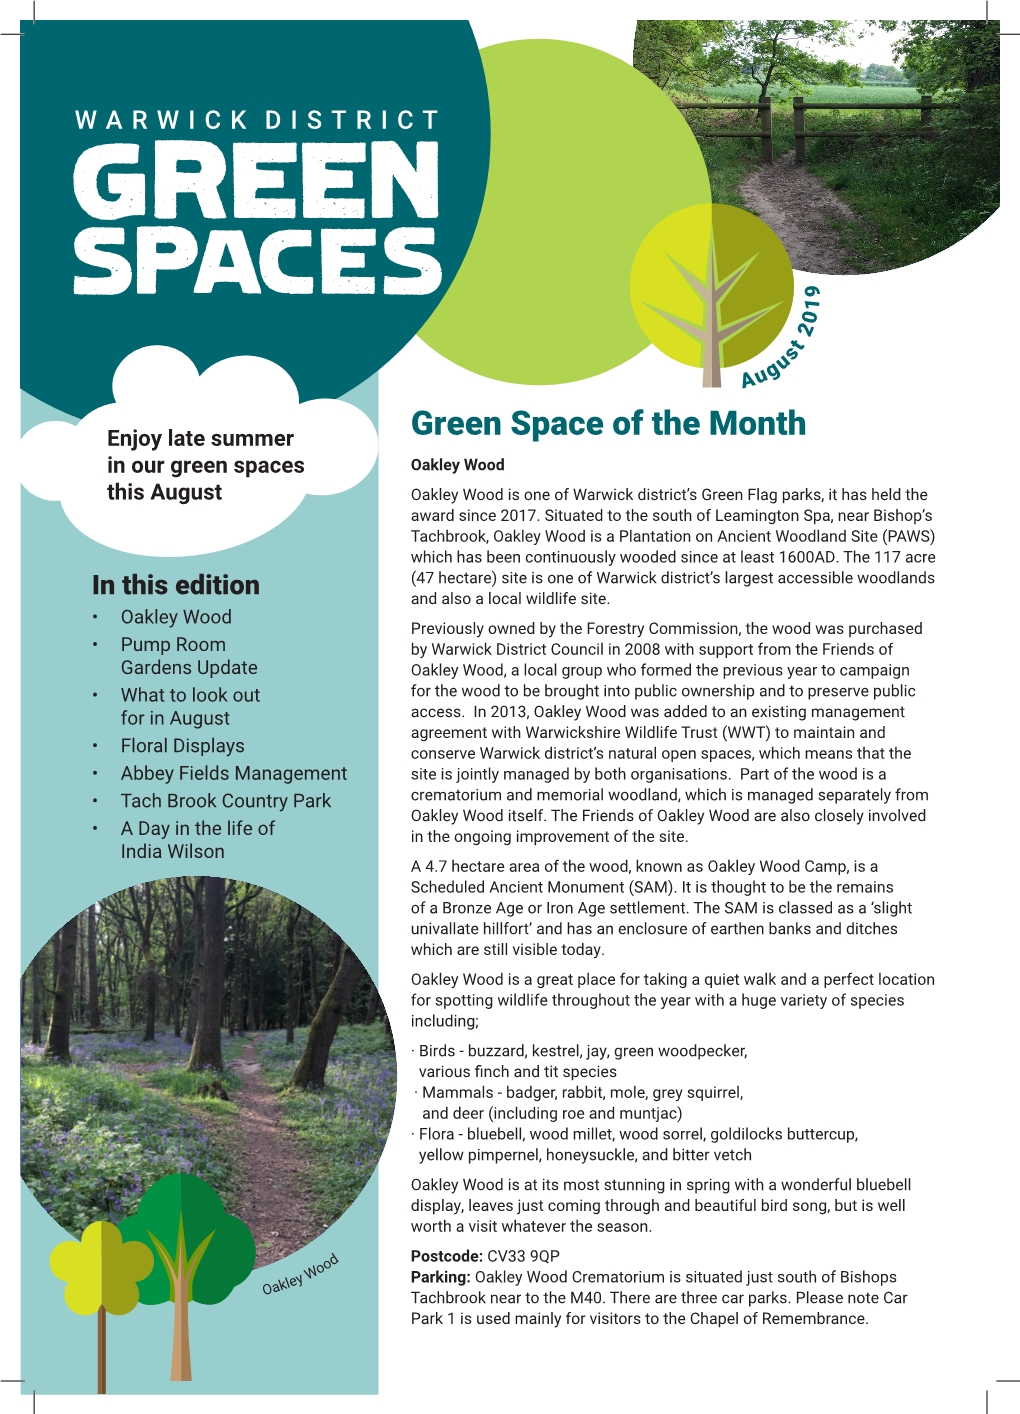 Download: Green Spaces Newsletter